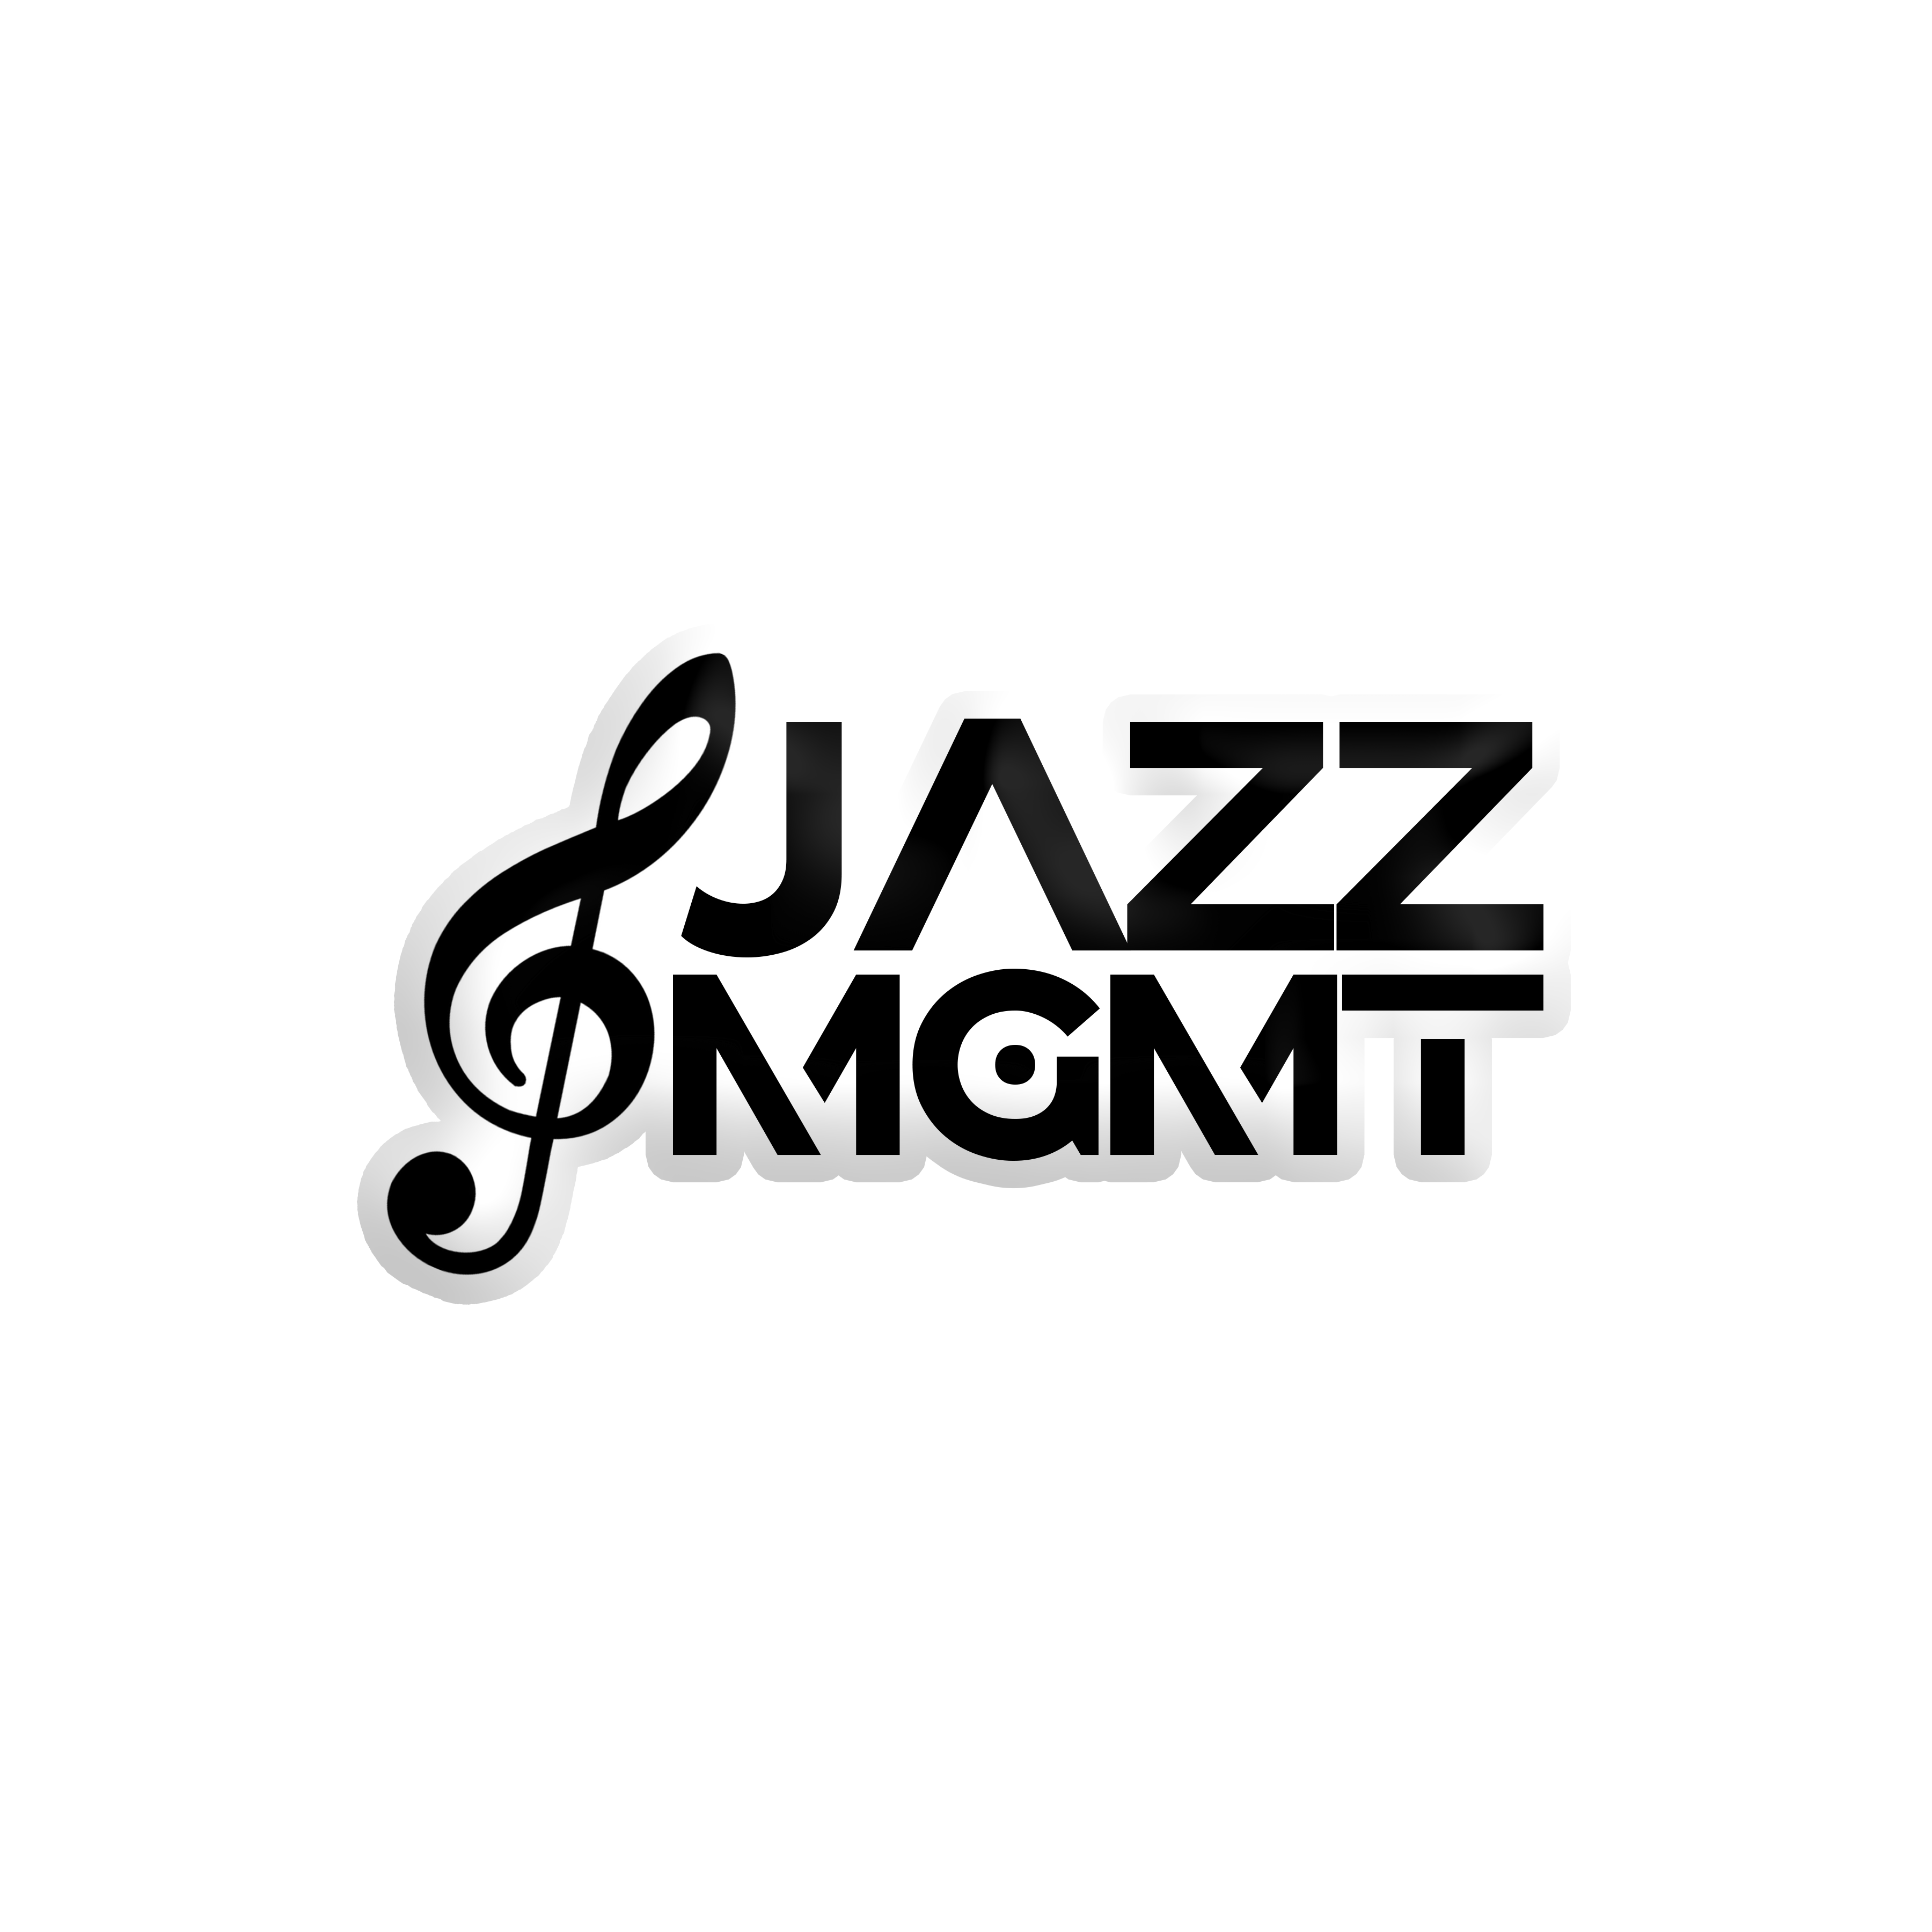 JAZZMGMT: A Passionate Music Lover and Innovative Talent-Spotter